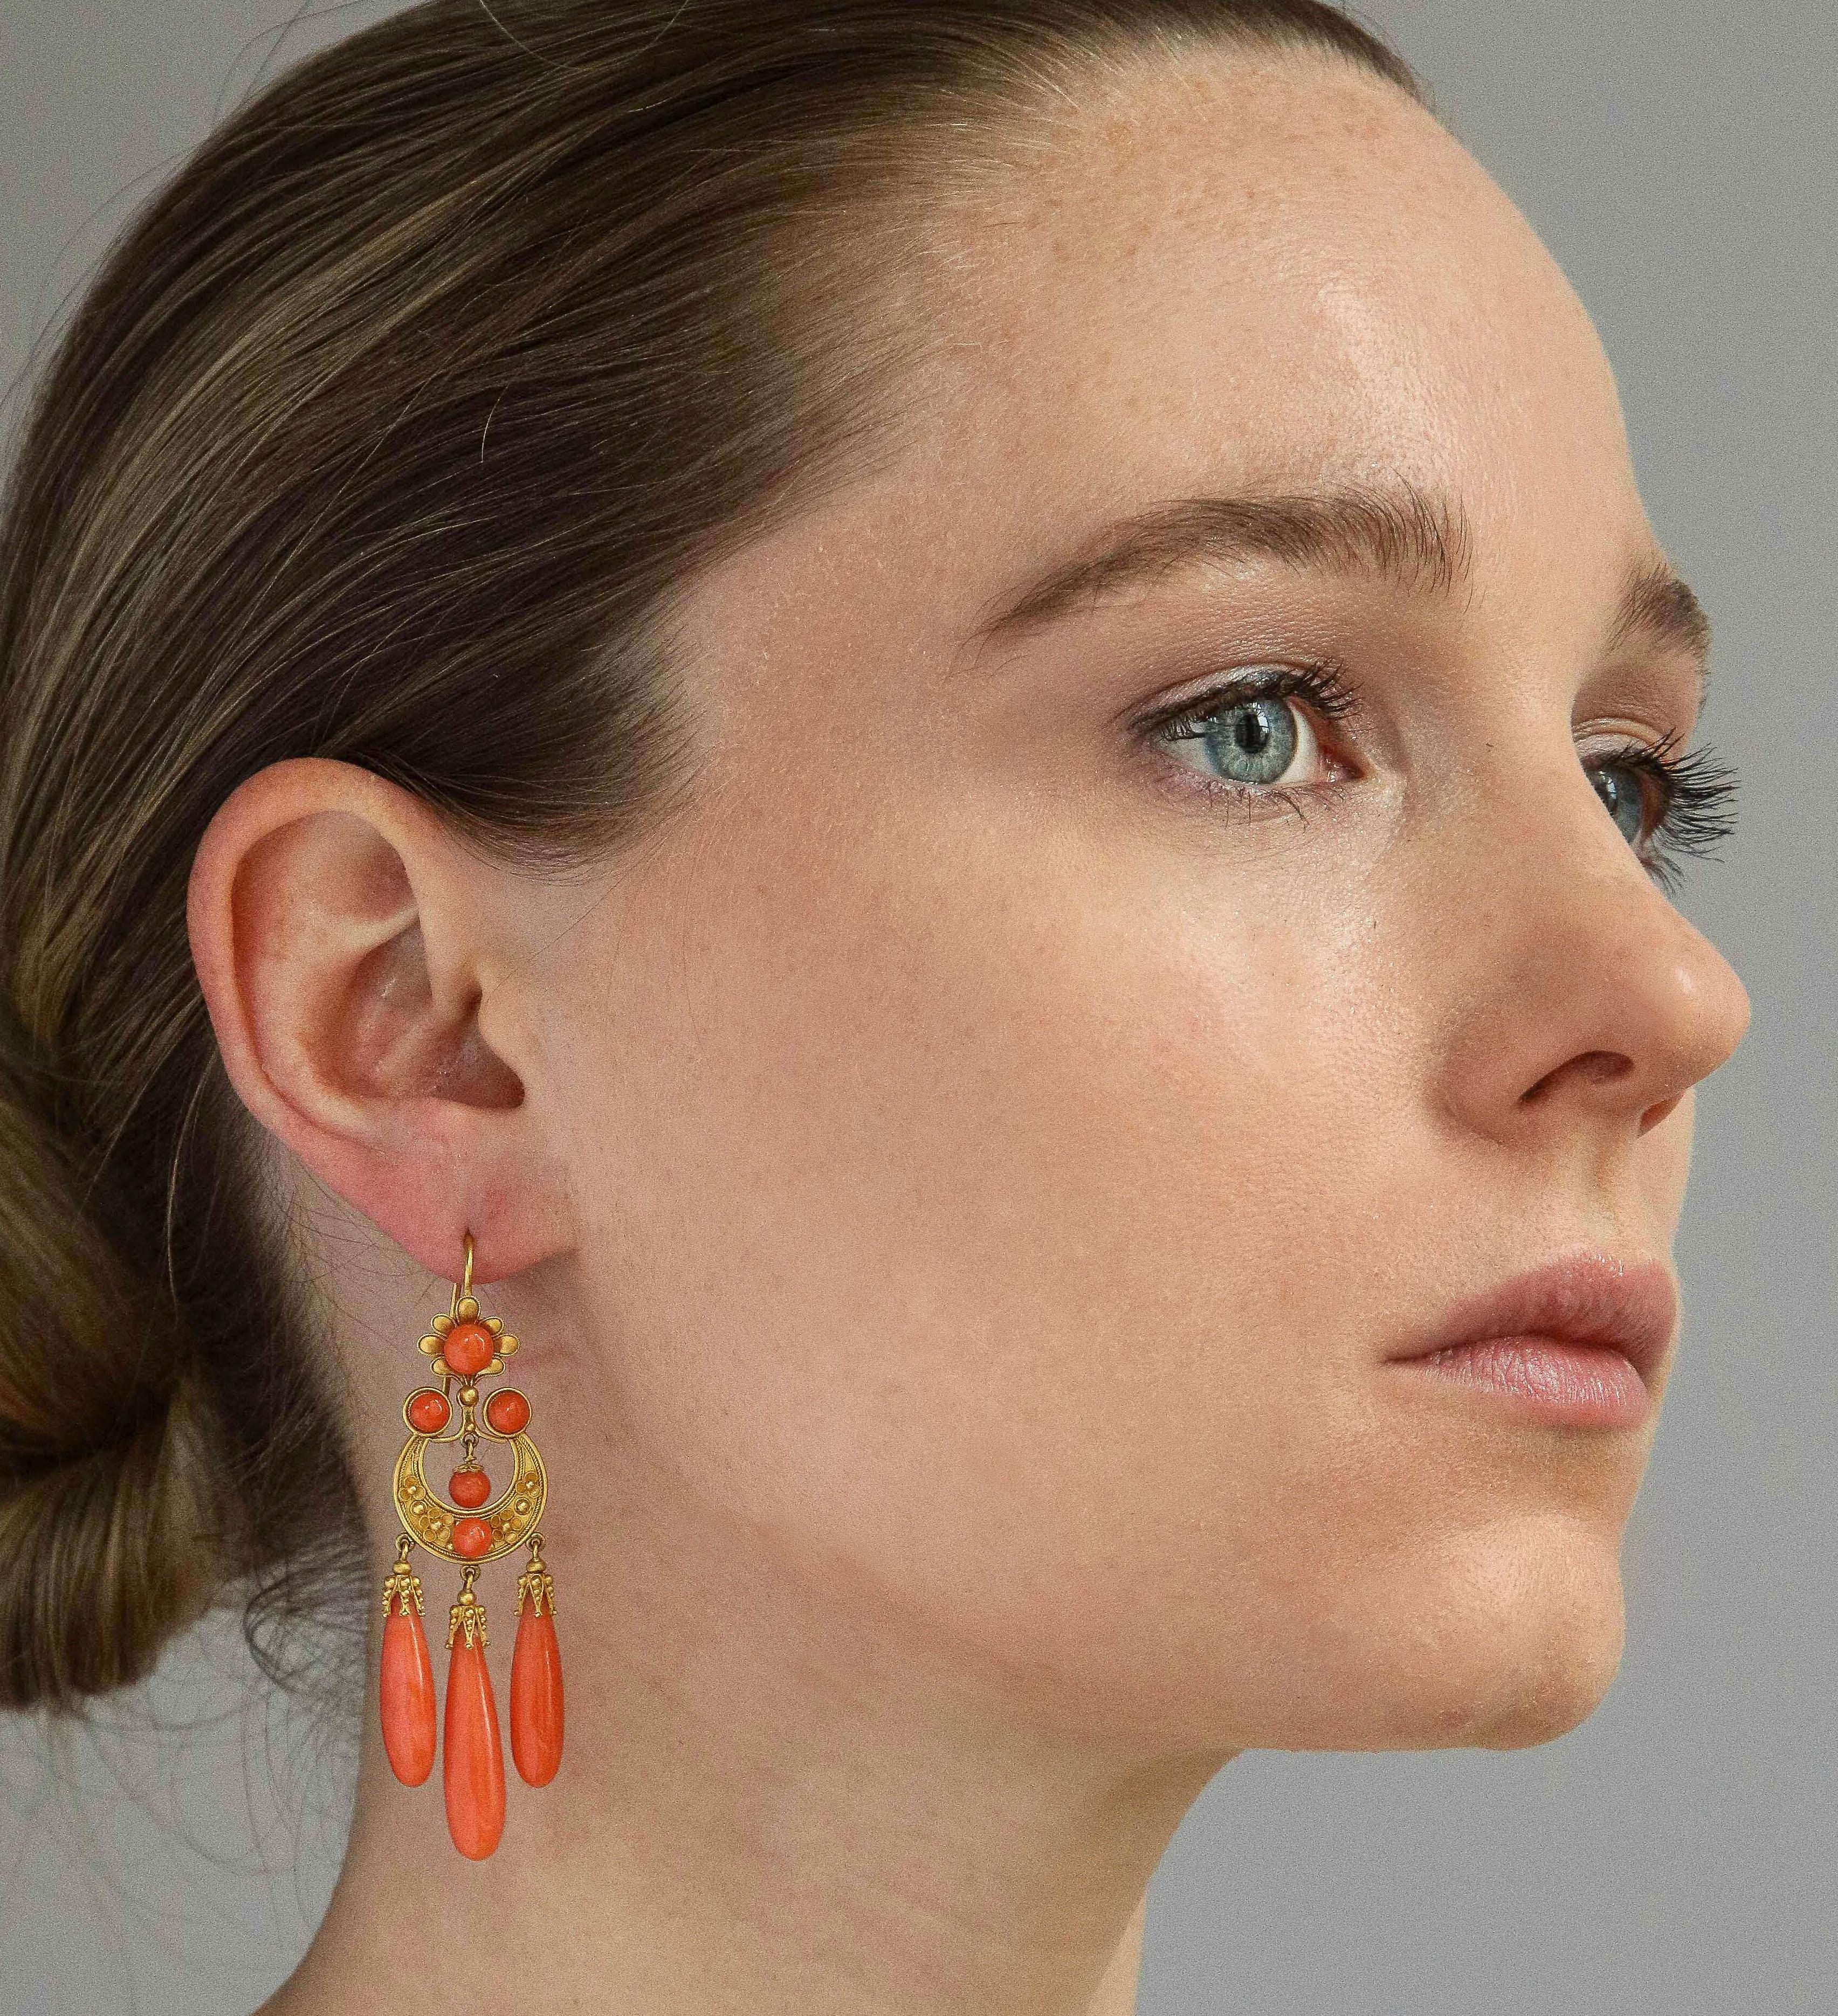 A beautifully hand crafted Victorian pendant/brooch and earring suite in Etruscan style, made of 18K yellow gold and natural Mediterranean coral. Maintained in original state in its fitted case. Pendant 1 1/2 inches x 3 3/4 inches; and earrings 3/4